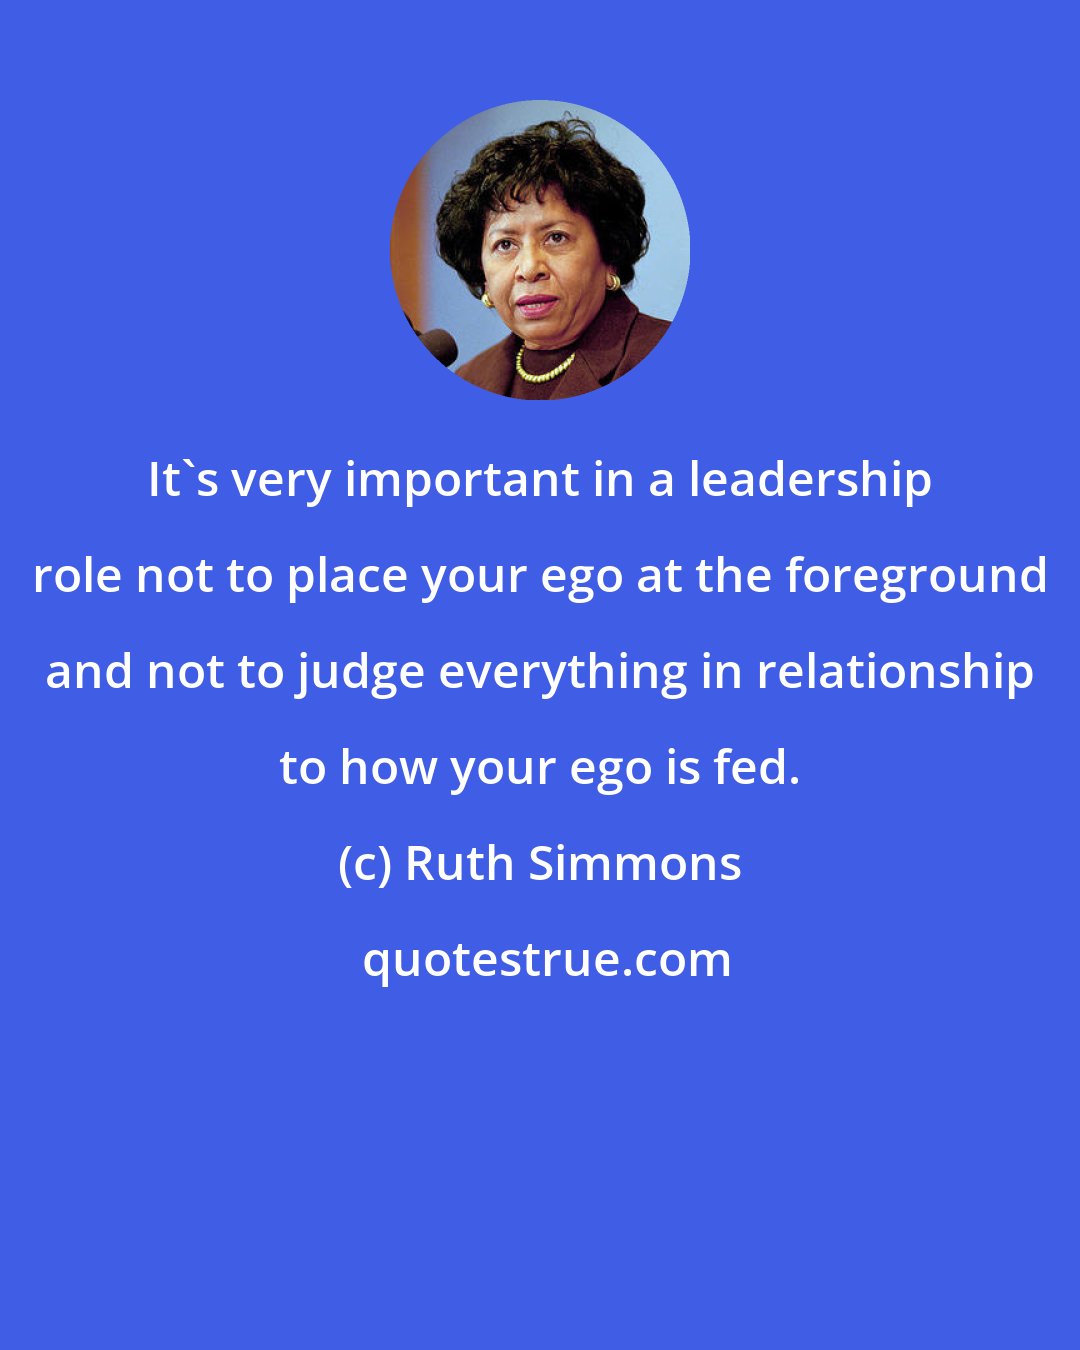 Ruth Simmons: It's very important in a leadership role not to place your ego at the foreground and not to judge everything in relationship to how your ego is fed.